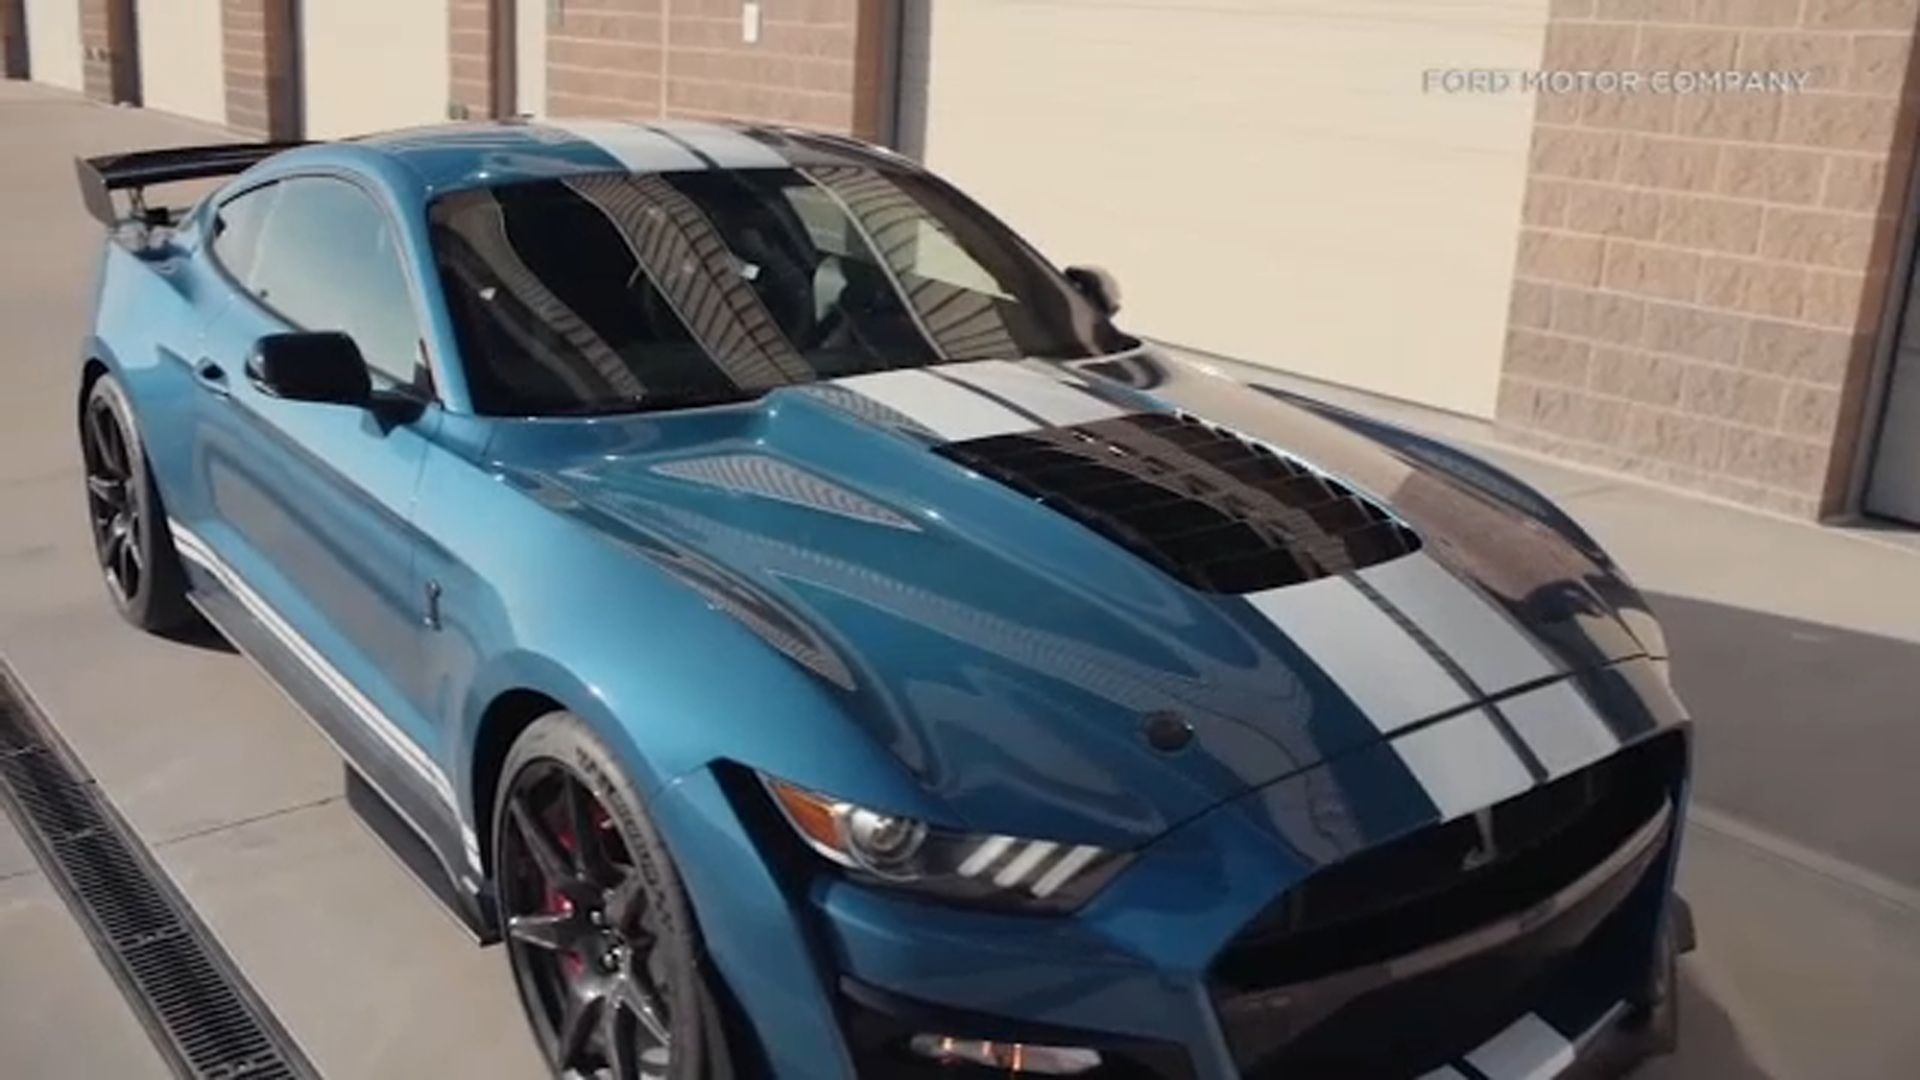 Ford sets record with most powerful, most expensive Mustang ever